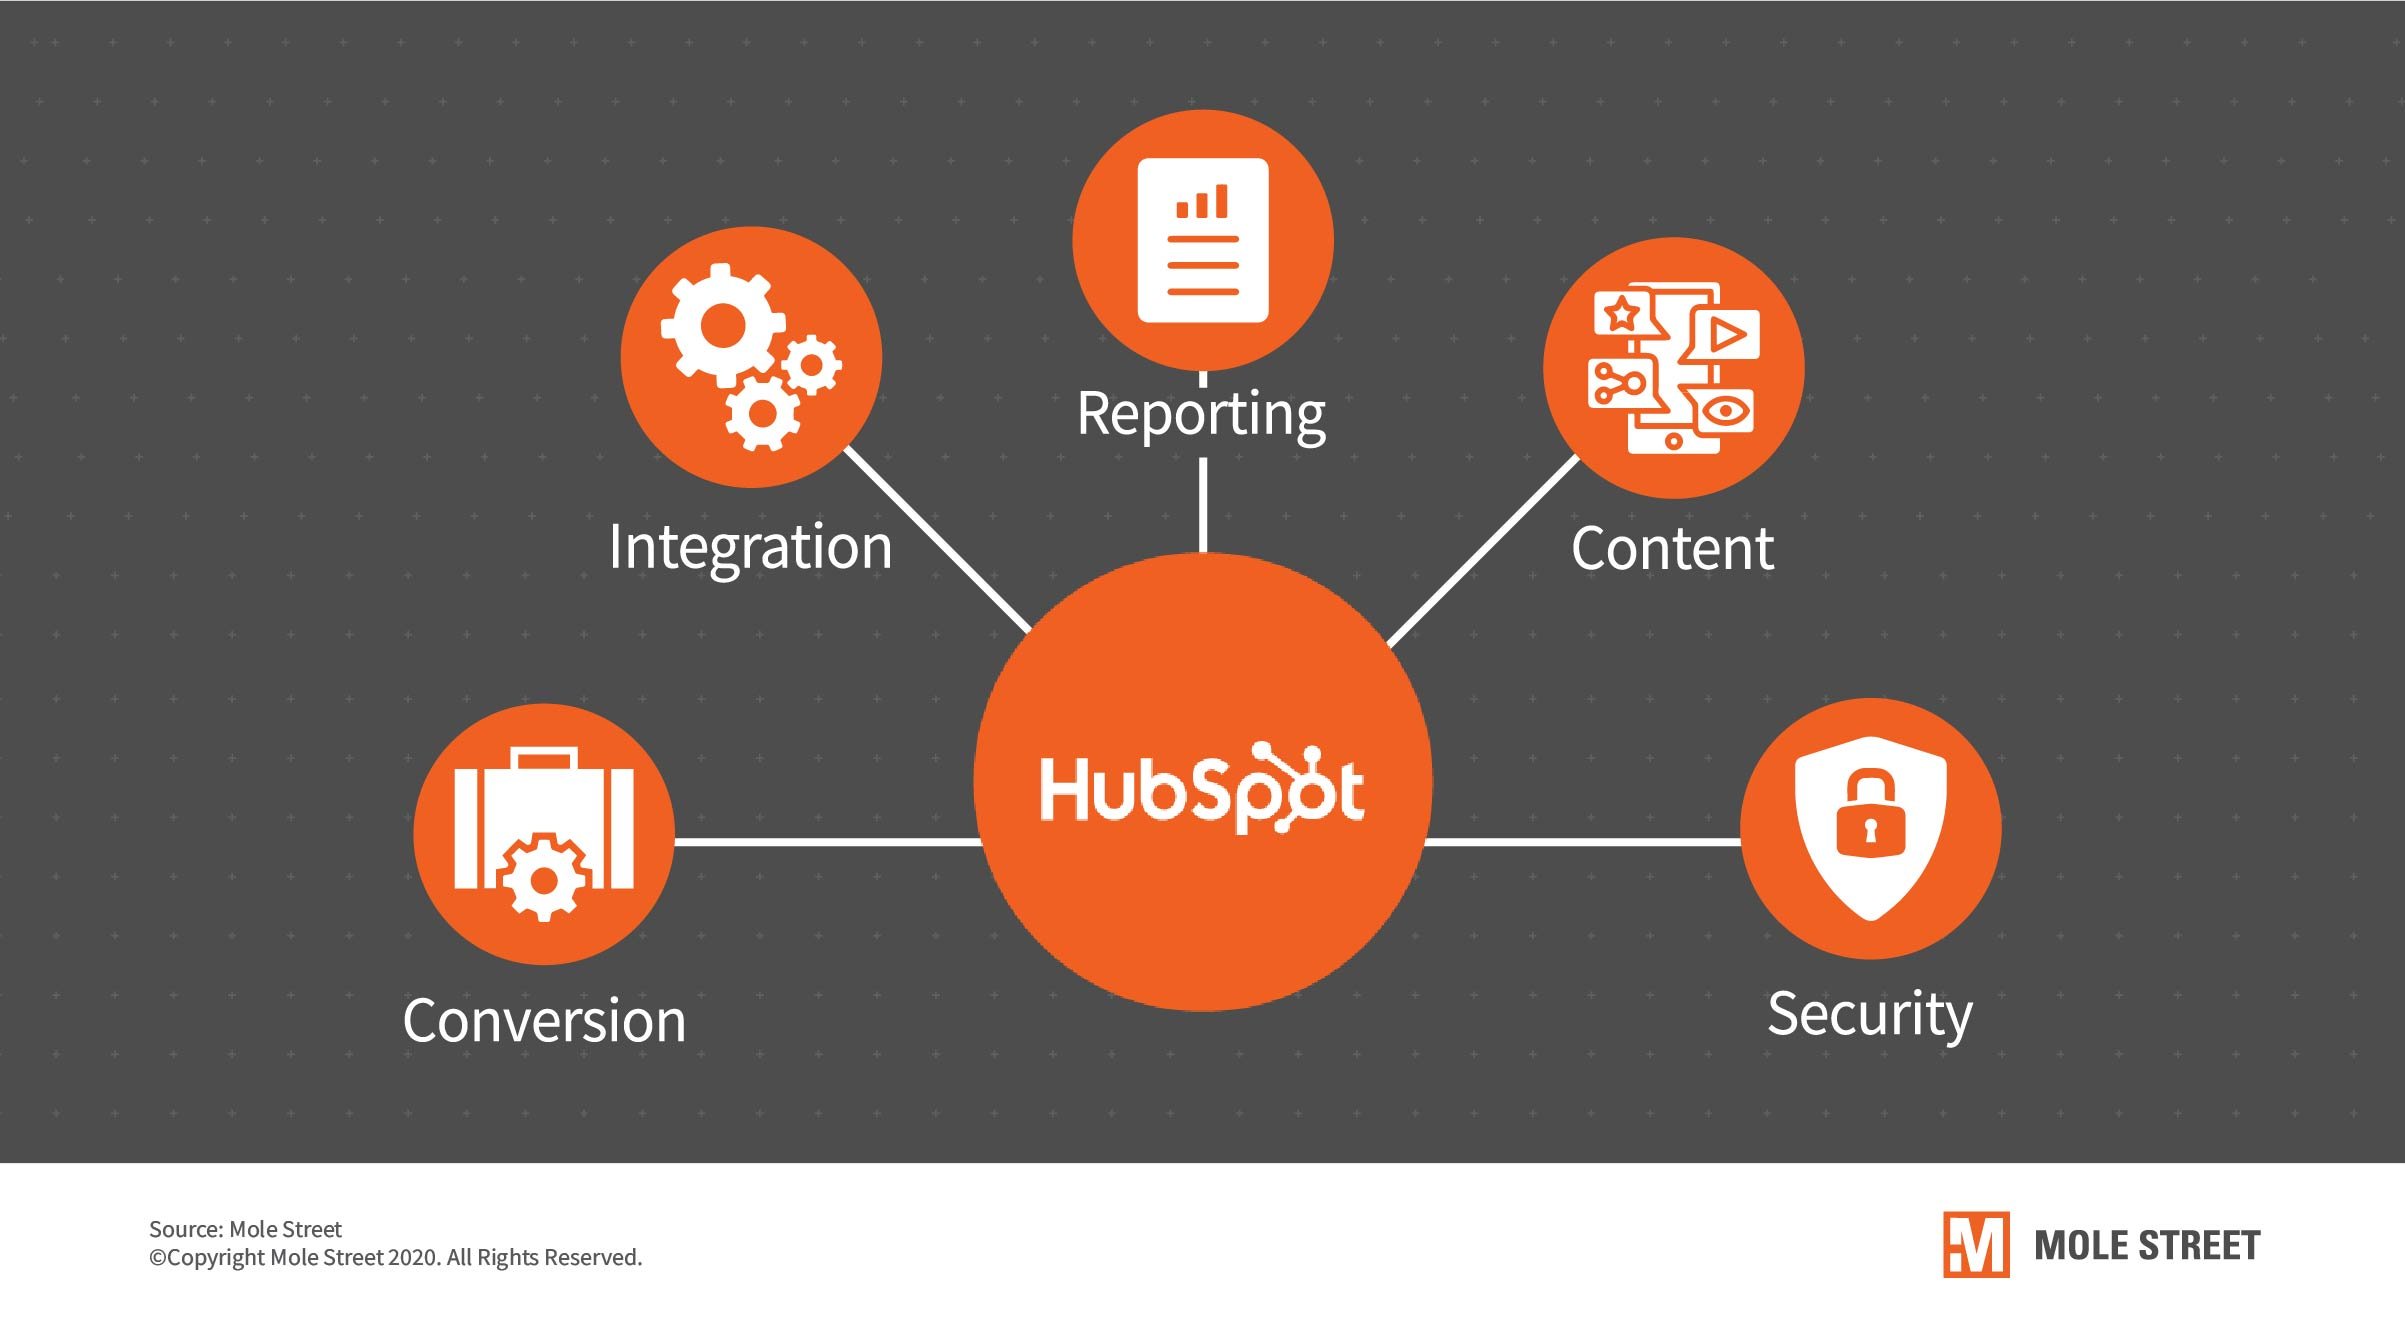 hubspot-integration-security-and-conversion